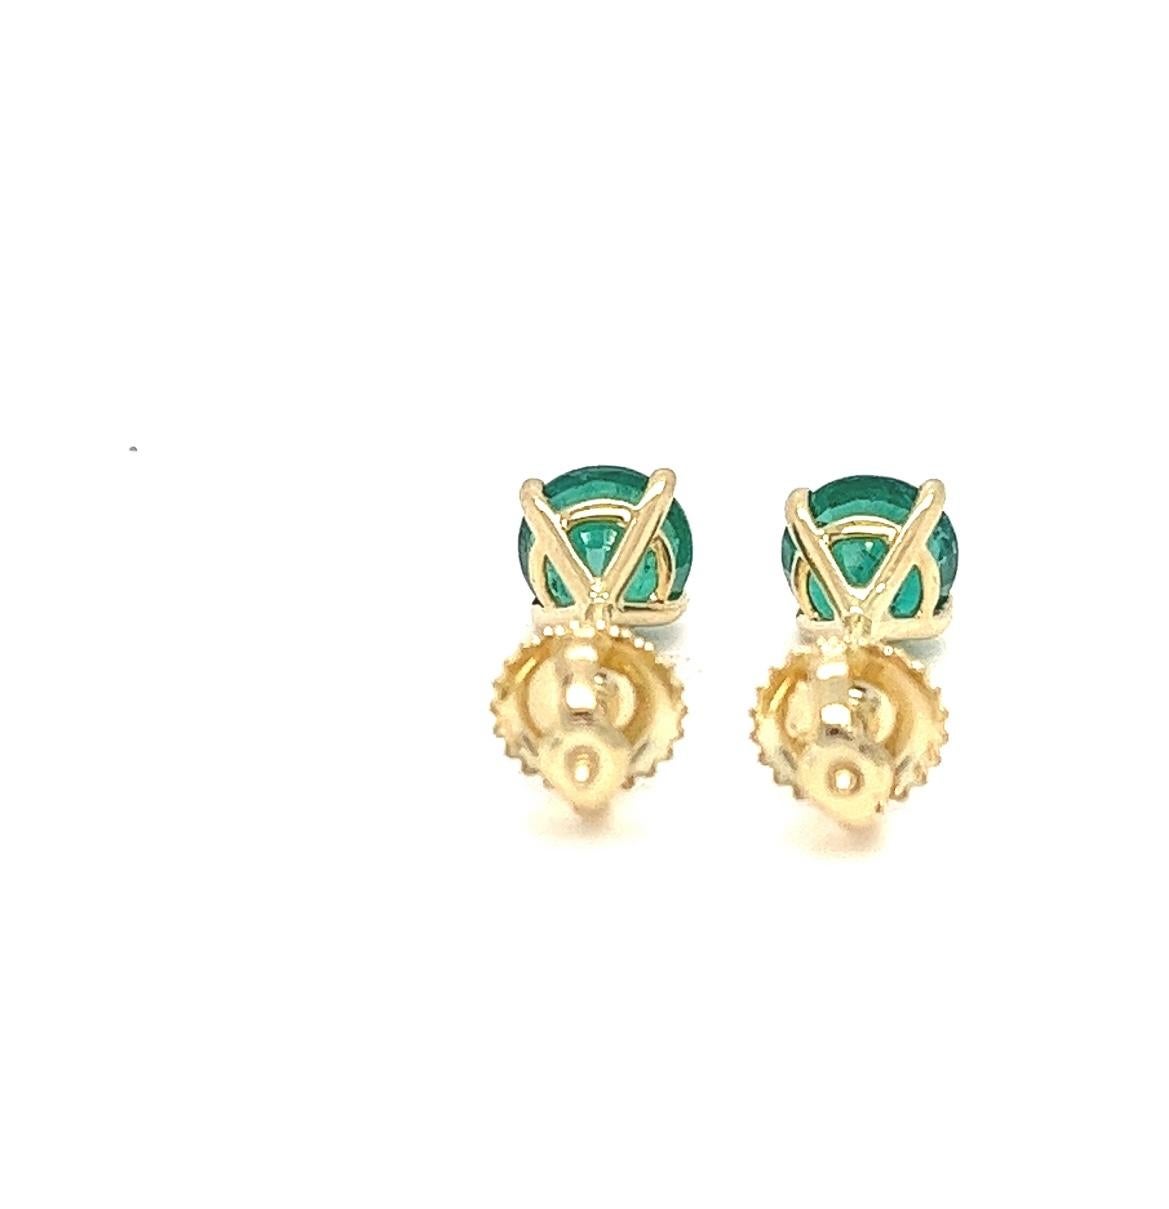 Round Cut 1.45 carats round Emerald Stud Earrings in 14K Yellow Gold. For Sale